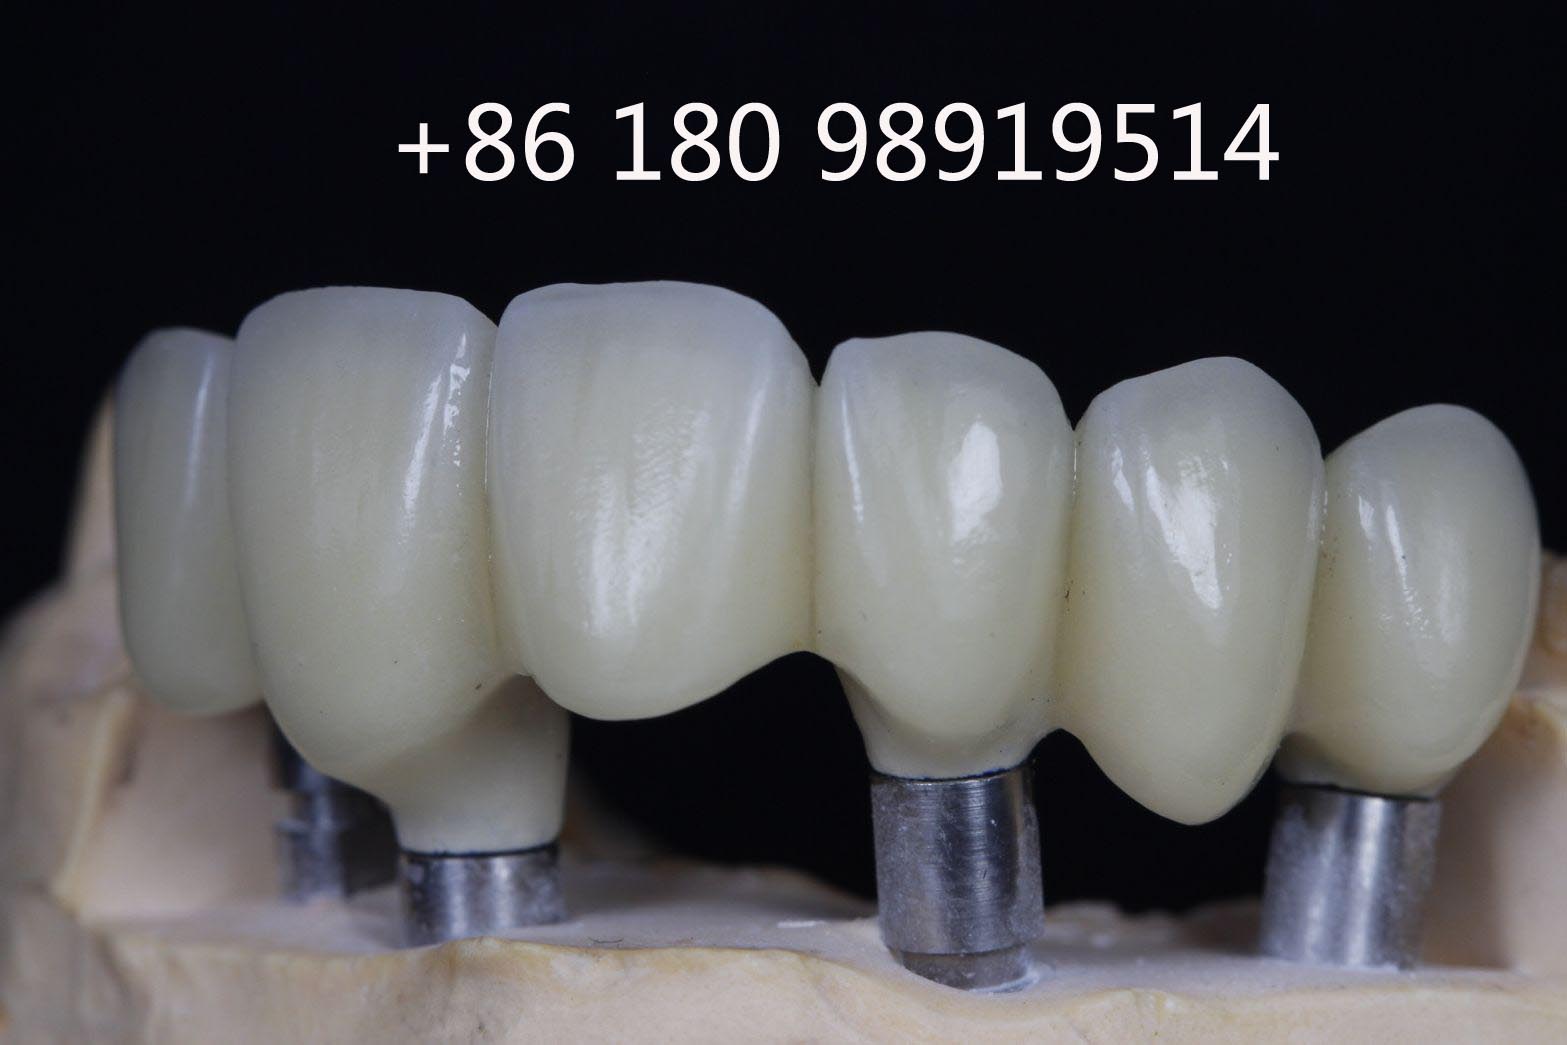 FDA certificated Chinese dental lab looks for USA distributors